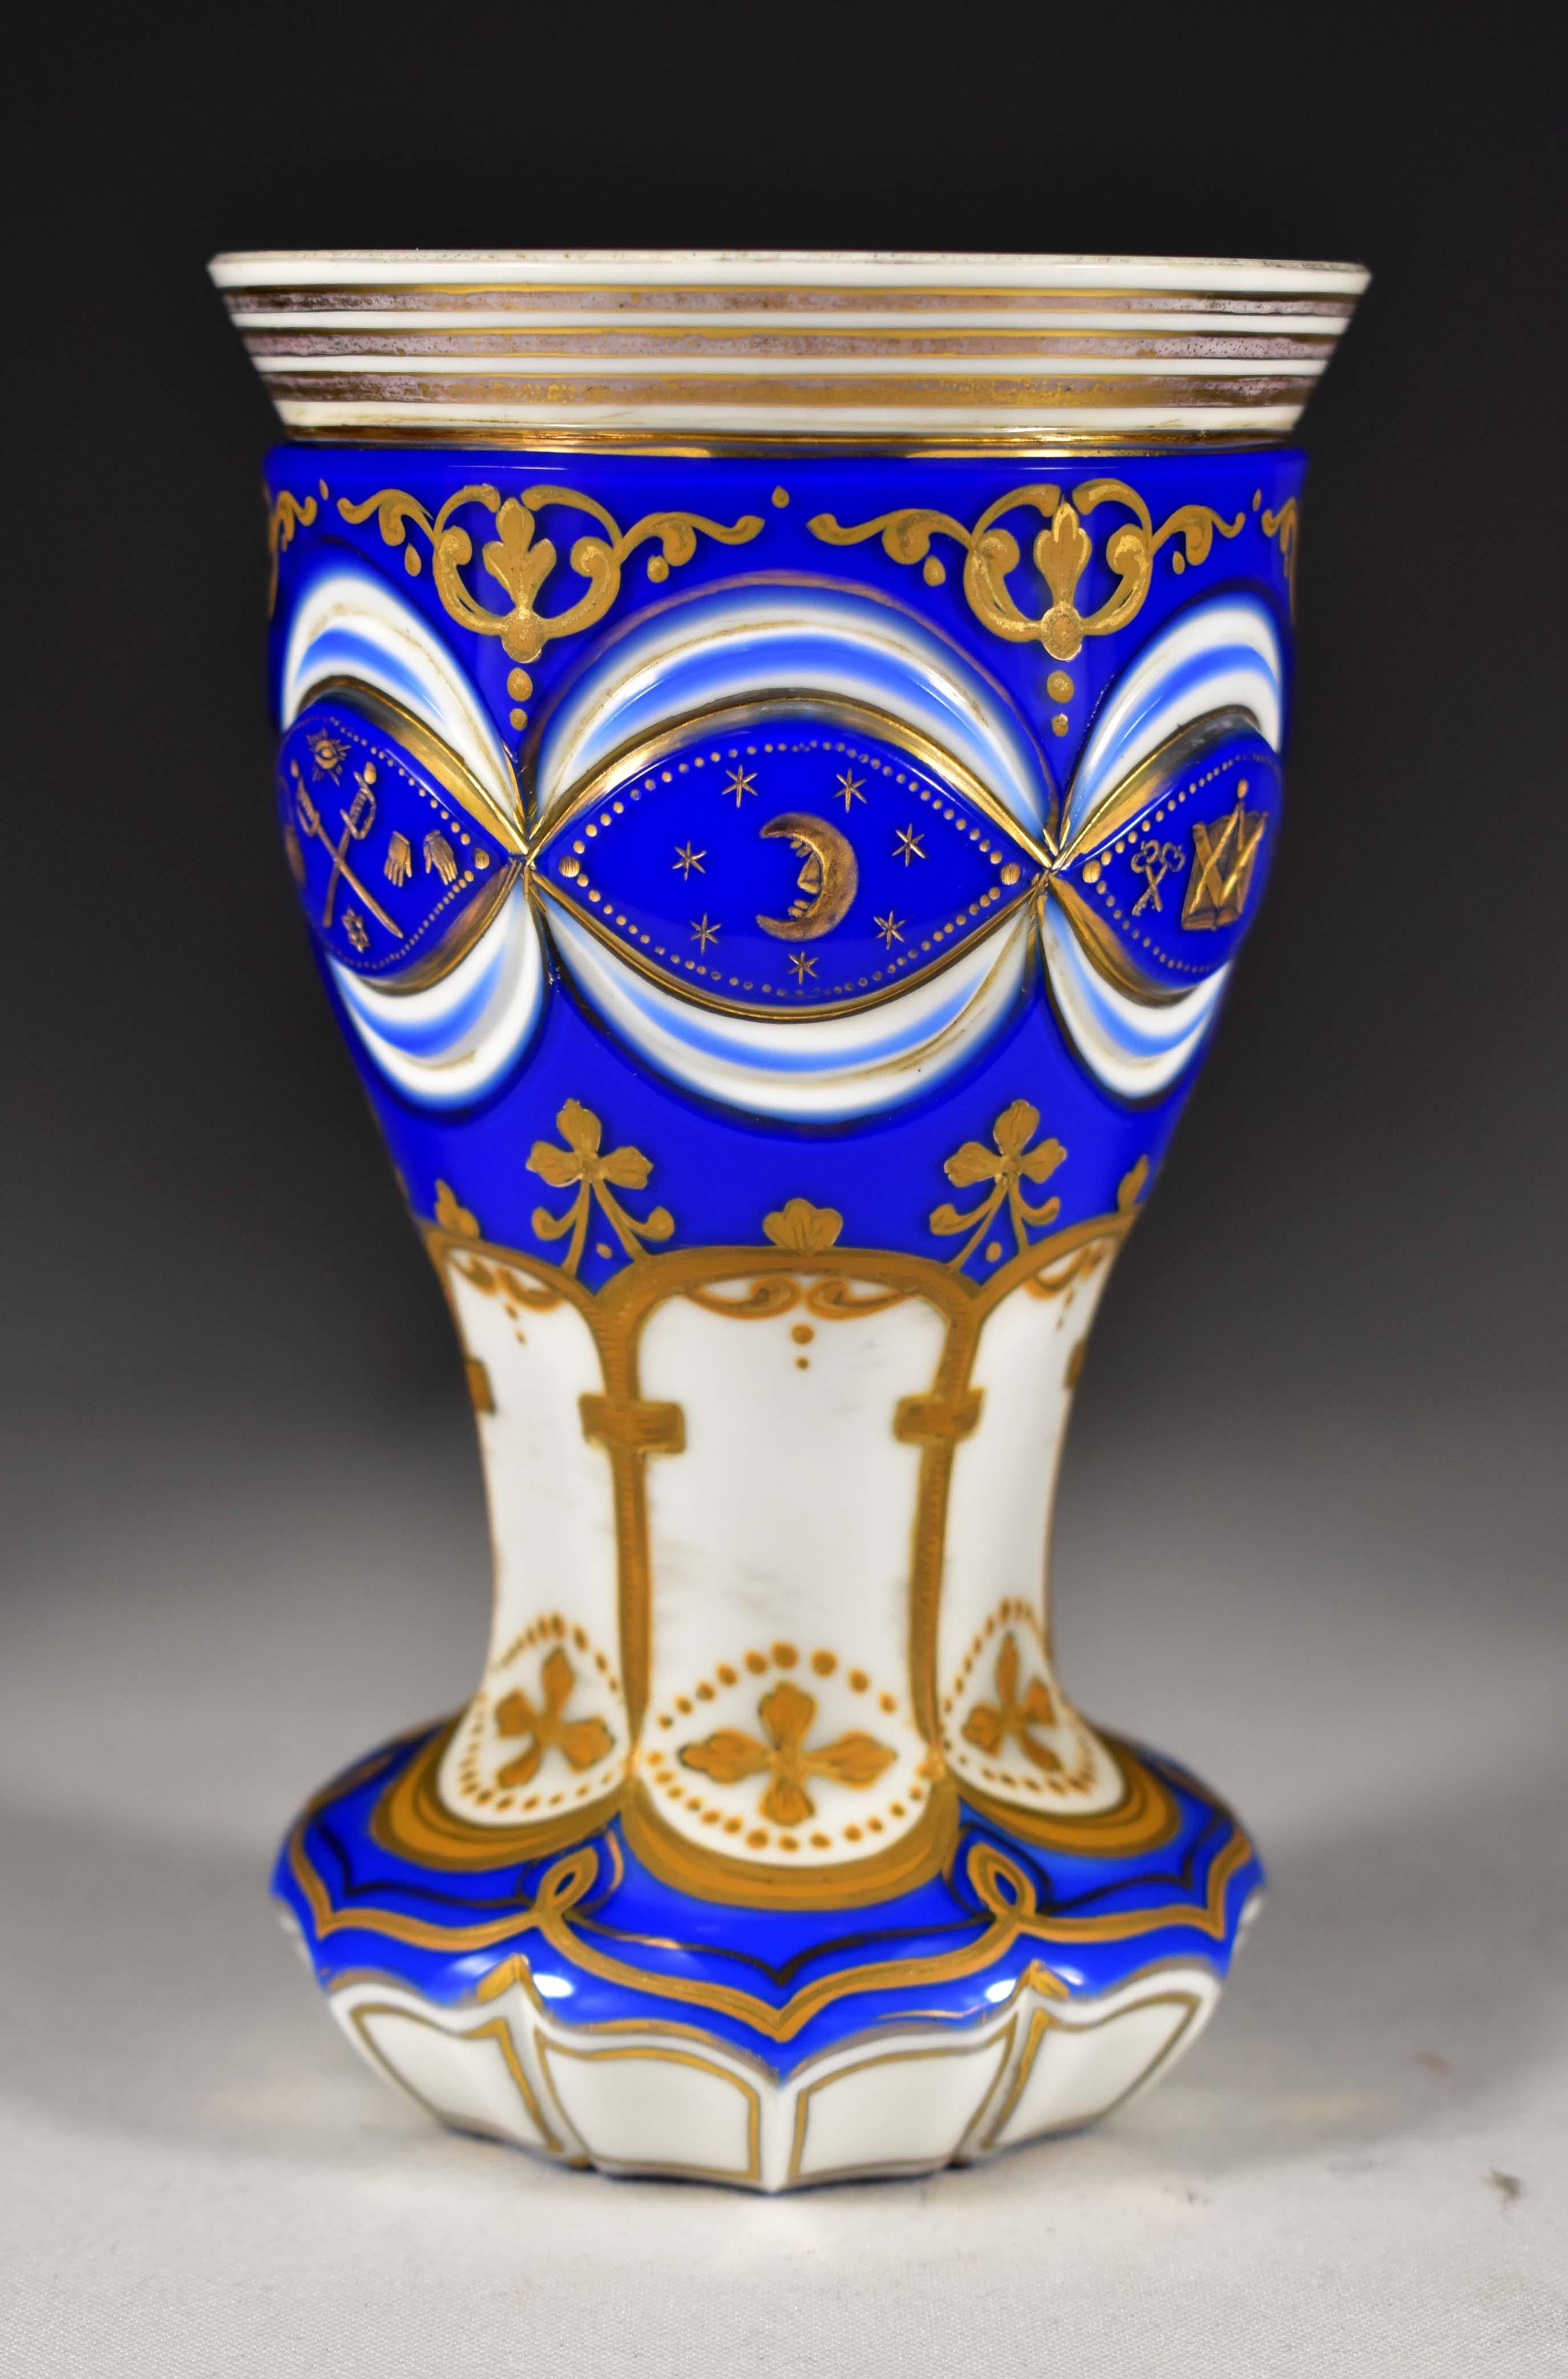 Antique overlay goblet, opal and cobalt glass.Goblet is Cut, engraved and painted, motif-symbolism of freemasons.The engraving is gilded and the painting is complemented with gold.There is also a gilded engraving with Latin inscriptions on the